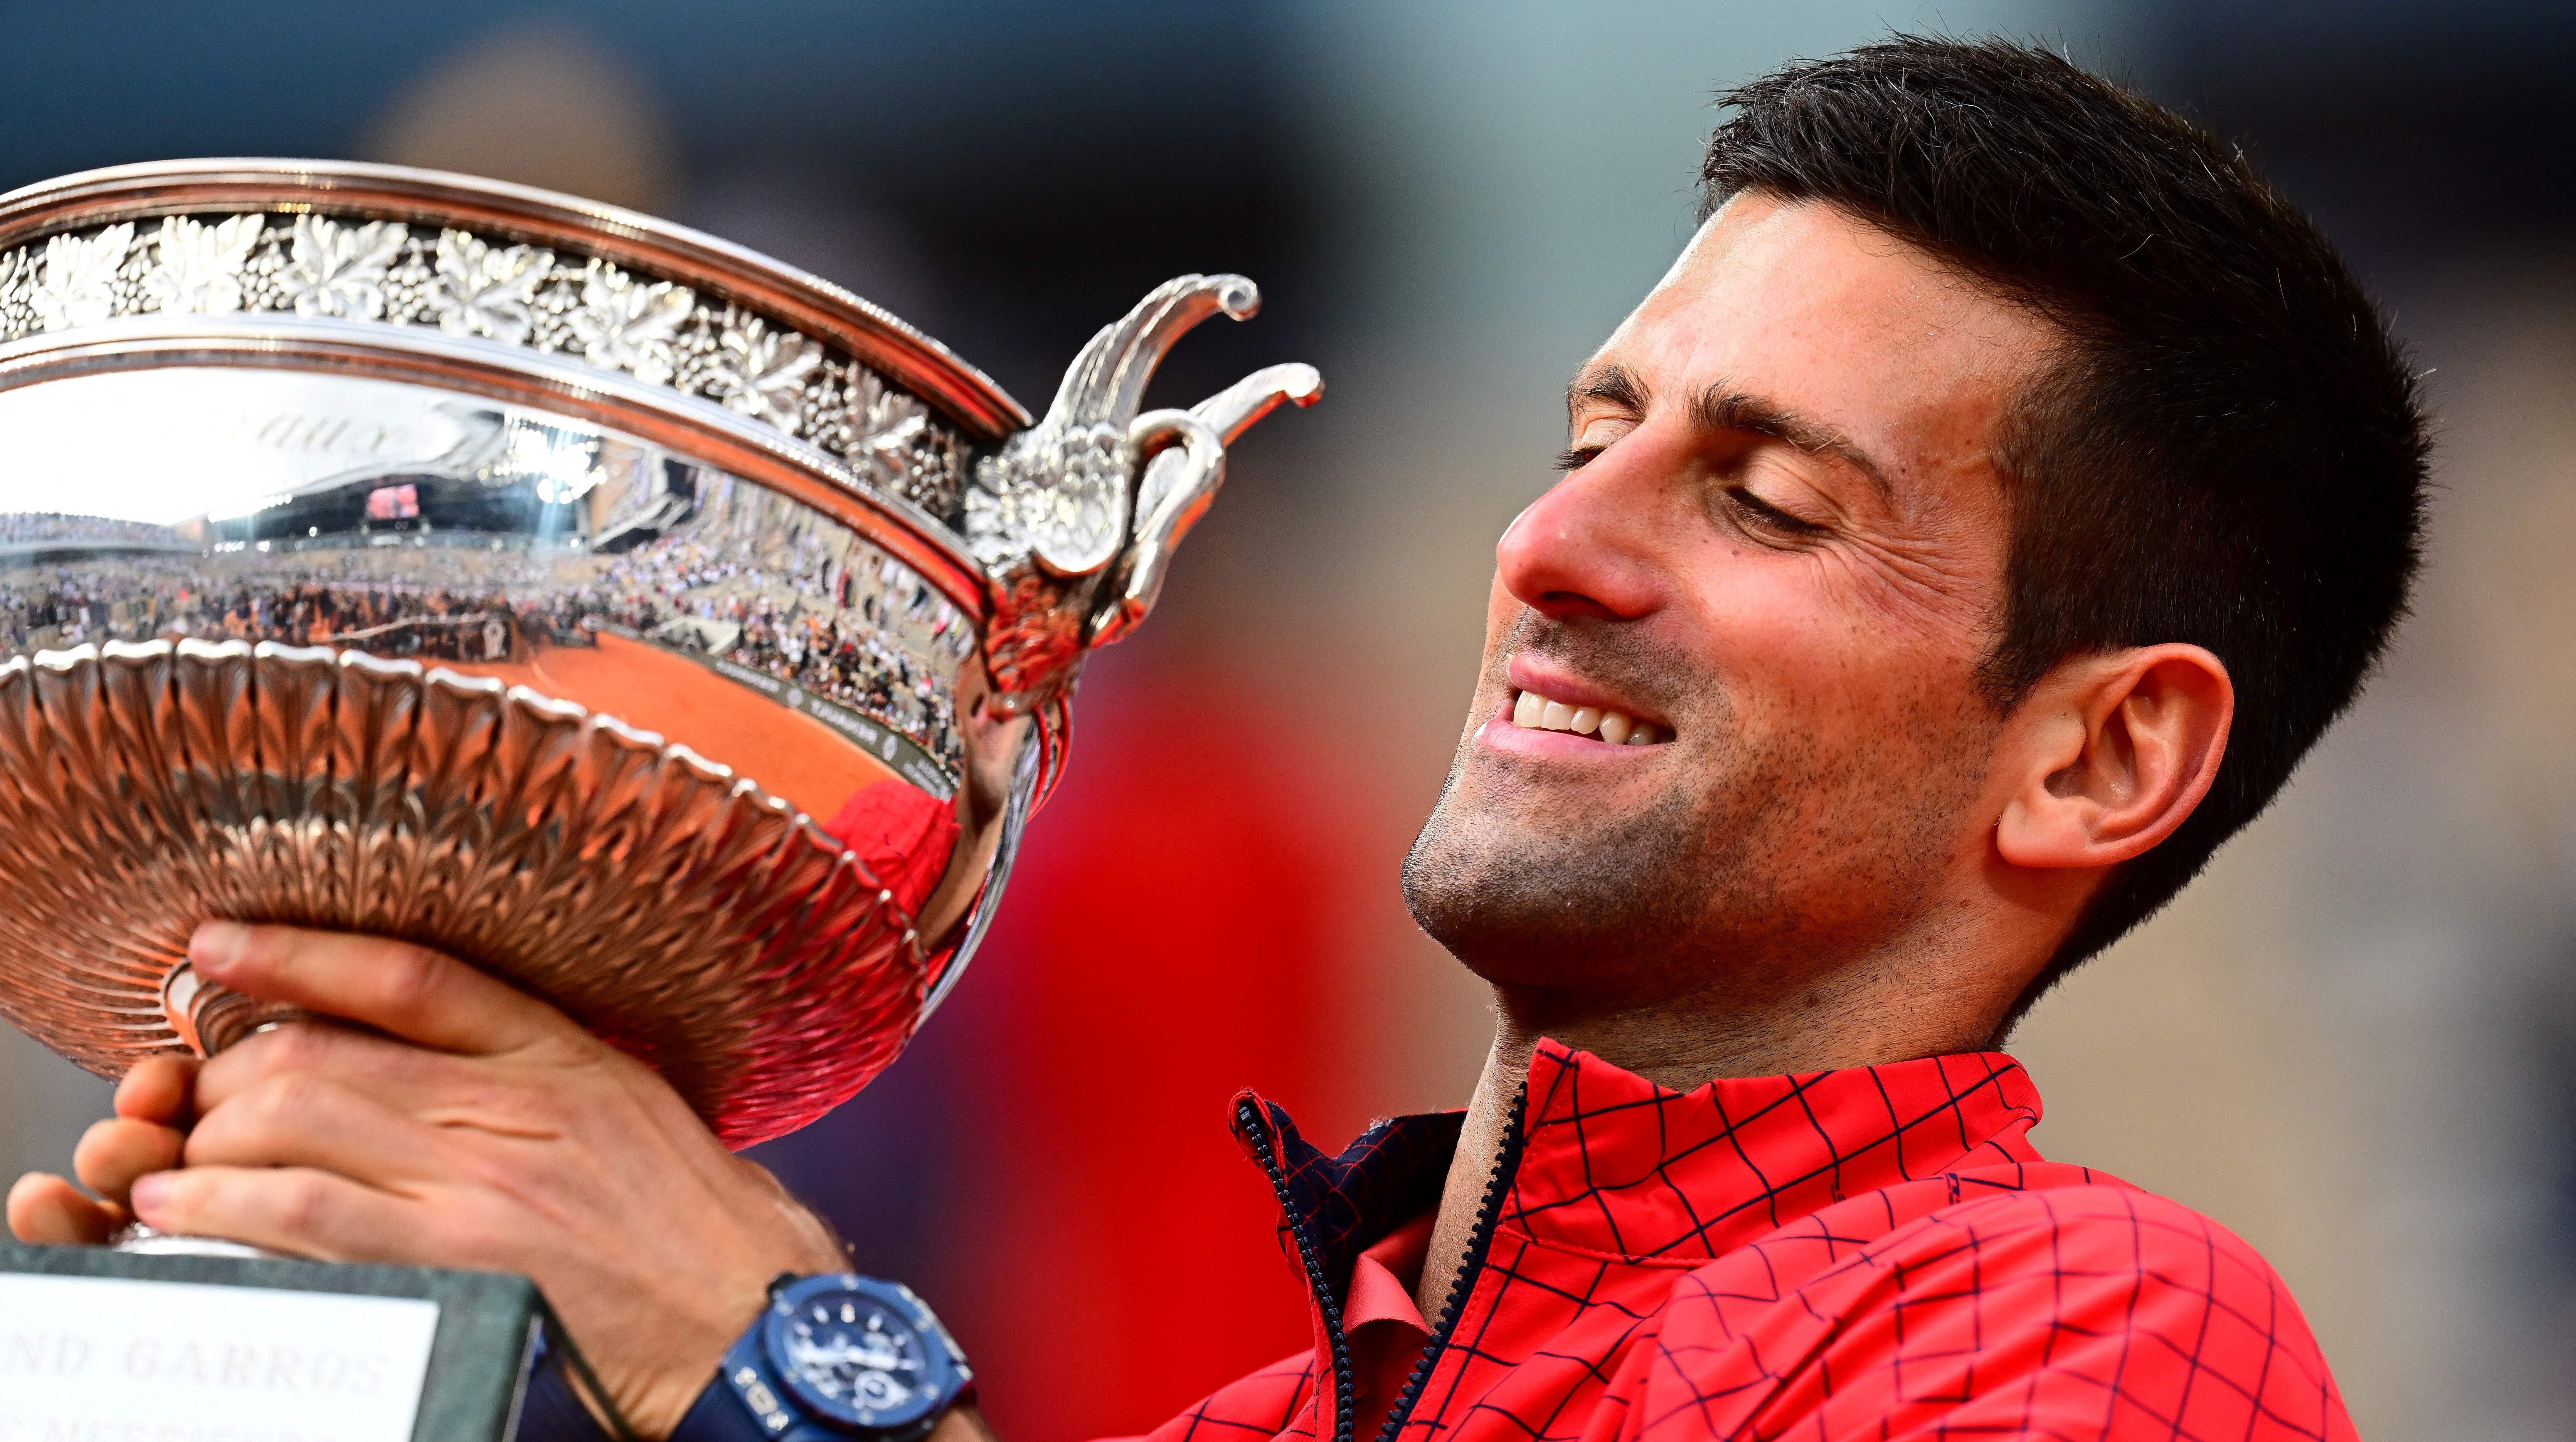 Grand Slam trophies: The prizes and rewards of the most